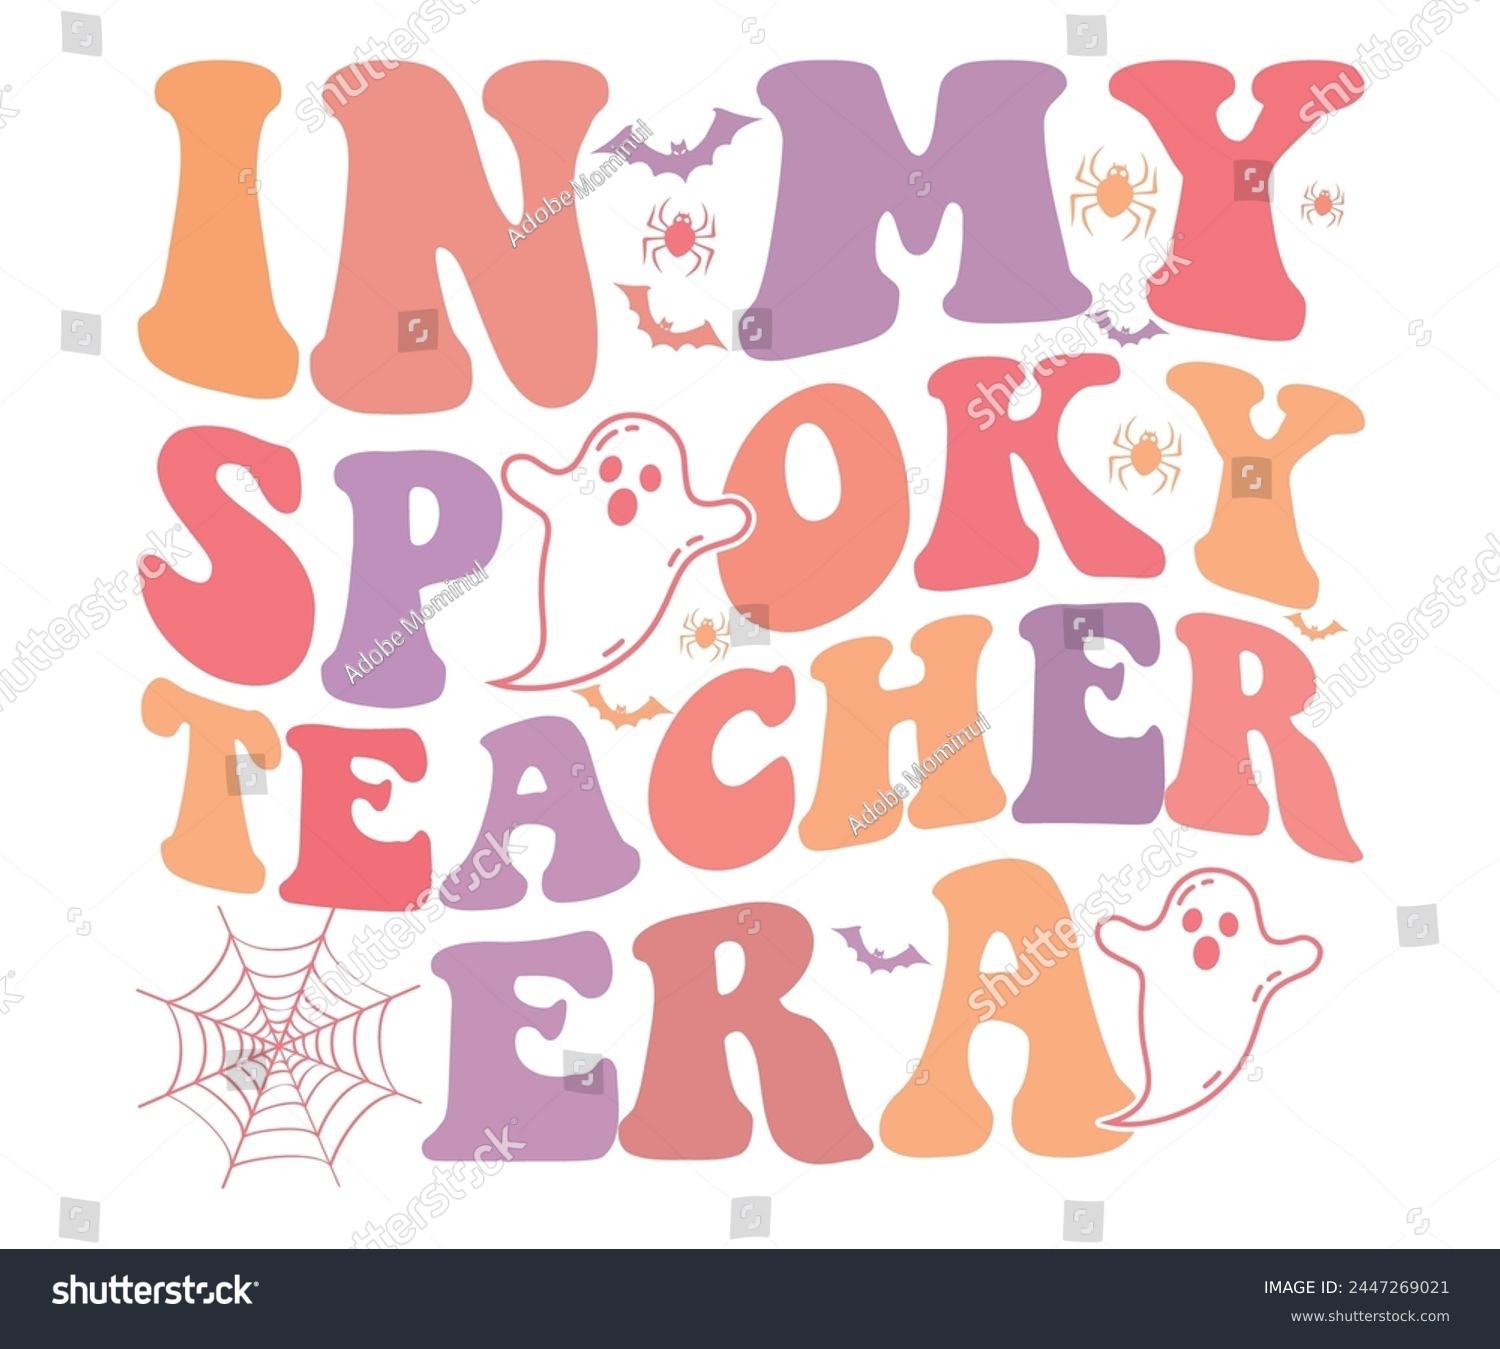 SVG of In My Spooky Teacher Era,Halloween Svg,Typography,Halloween Quotes,Witches Svg,Halloween Party,Halloween Costume,Halloween Gift,Funny Halloween,Spooky Svg,Funny T shirt,Ghost Svg,Cut file svg